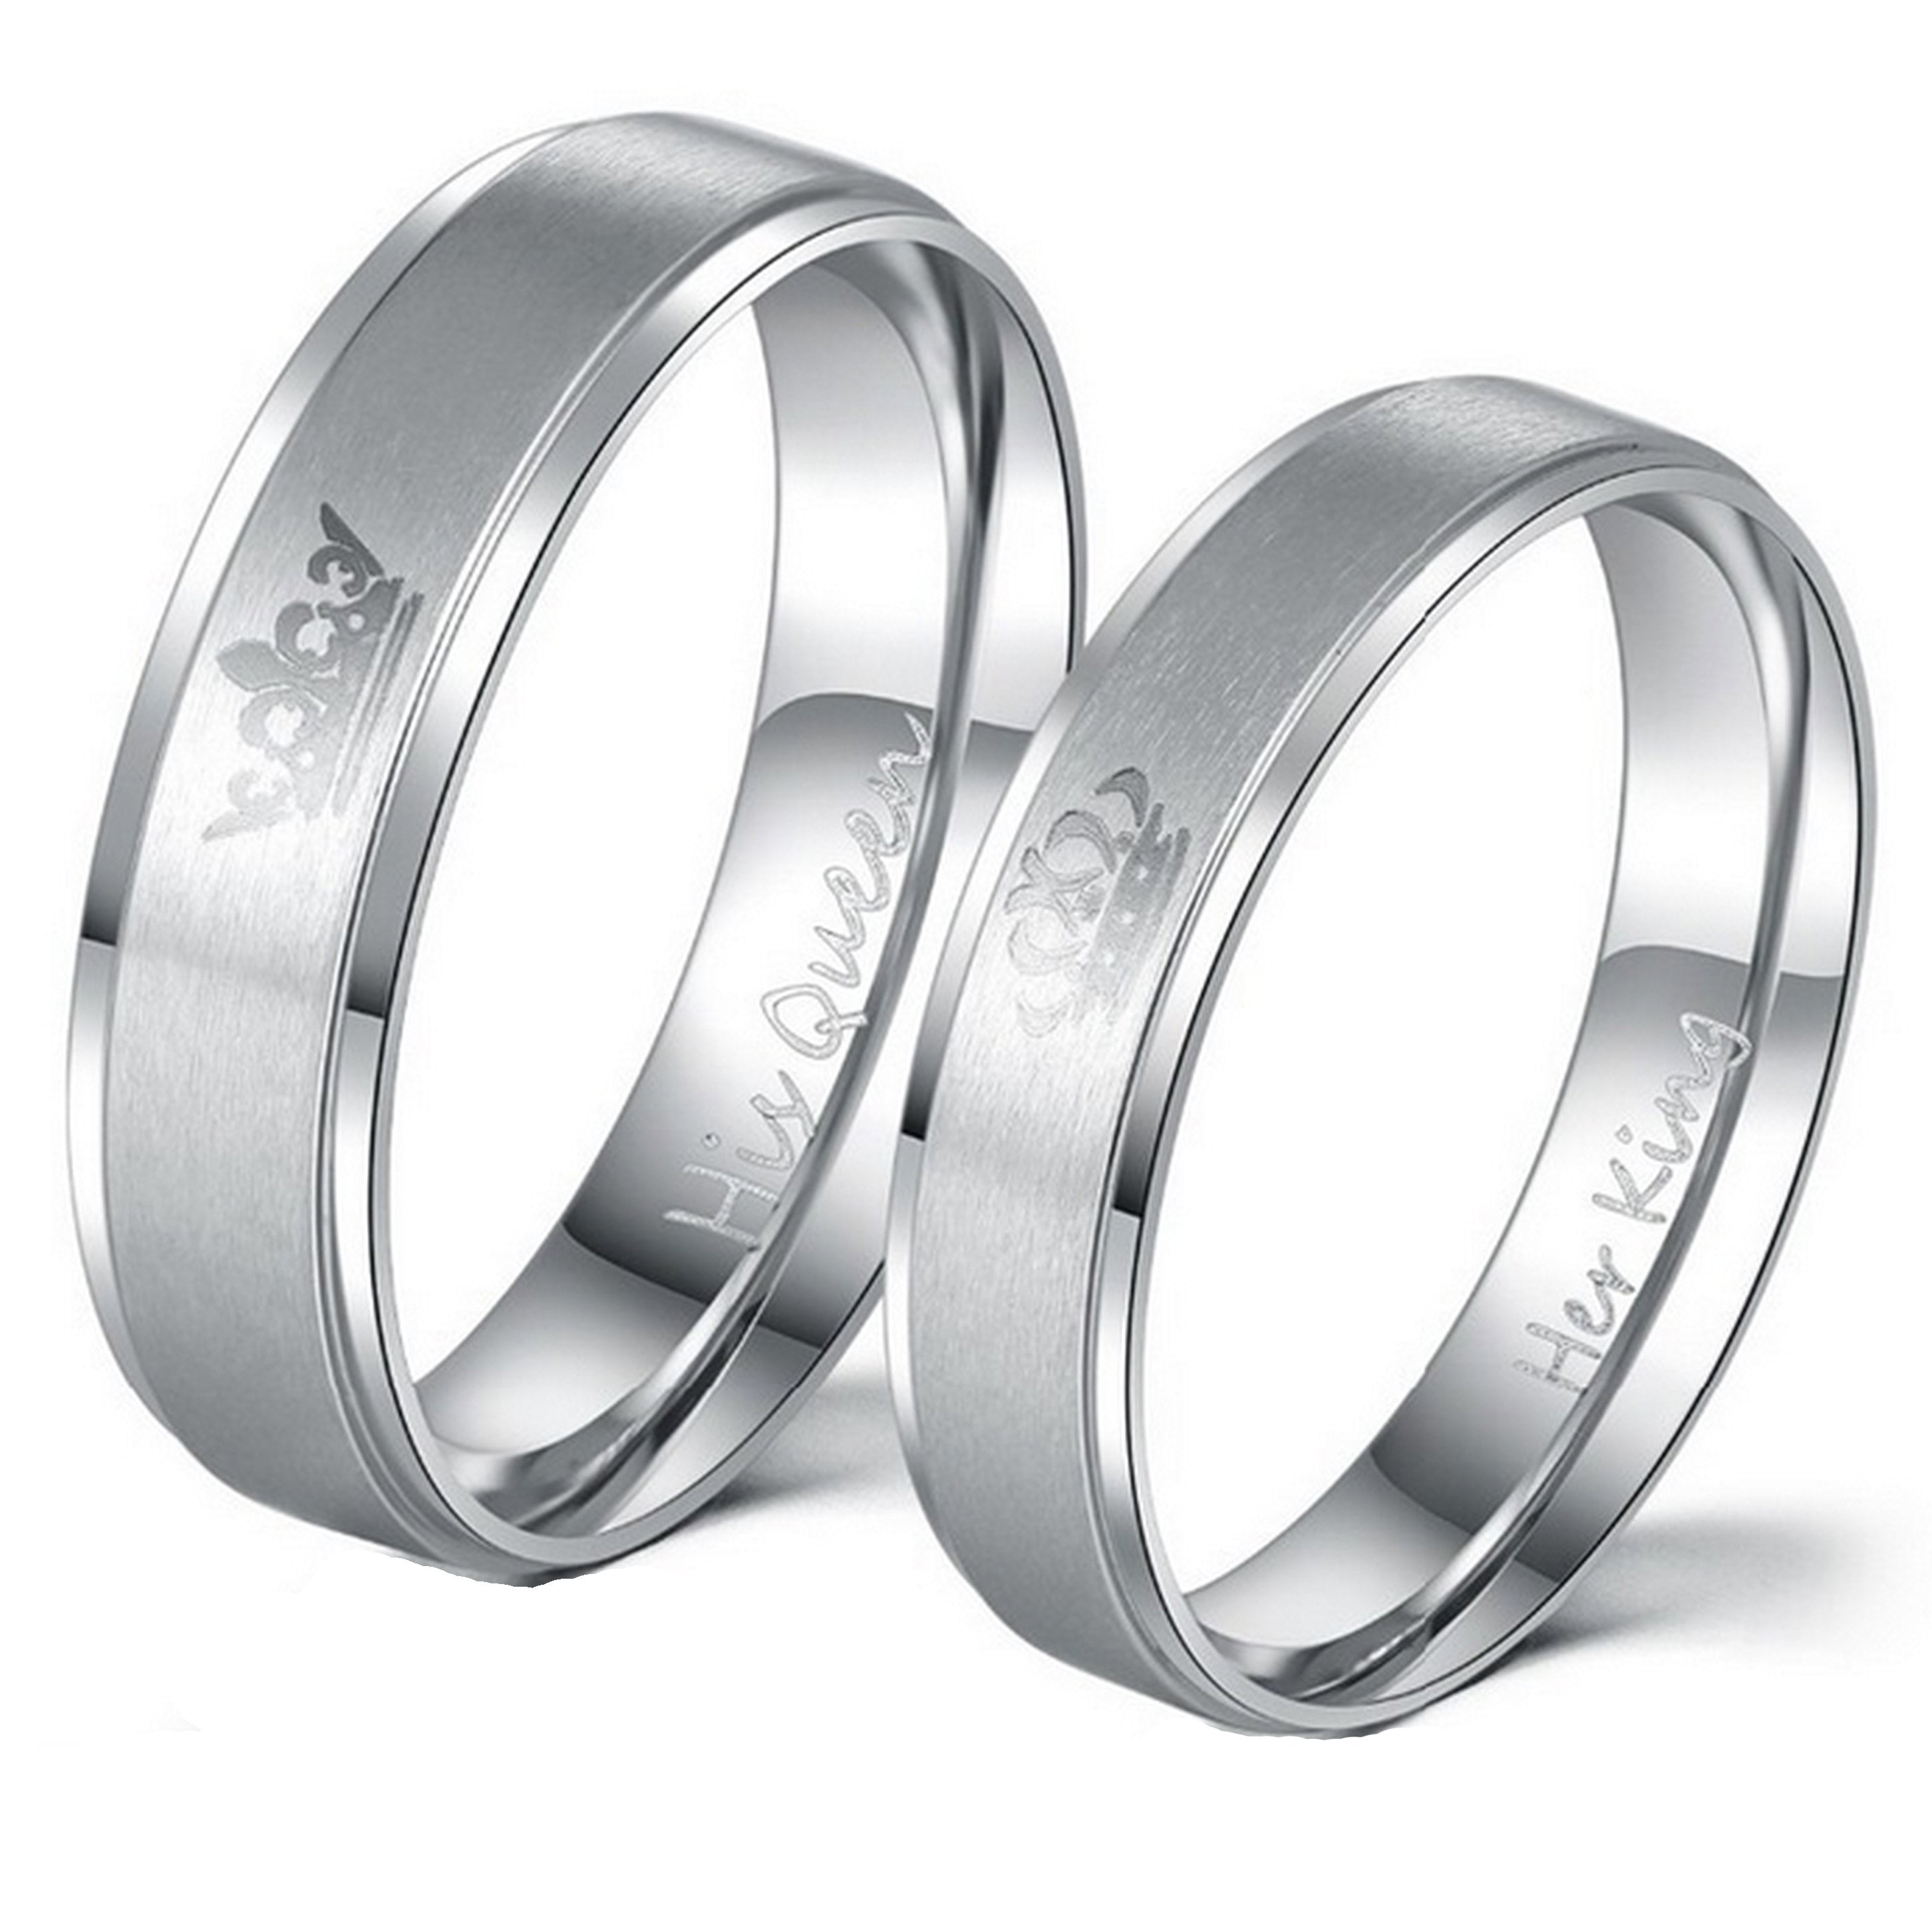 Couple's Matching King Queen Ring, "His Queen" or "Her King" Engraving